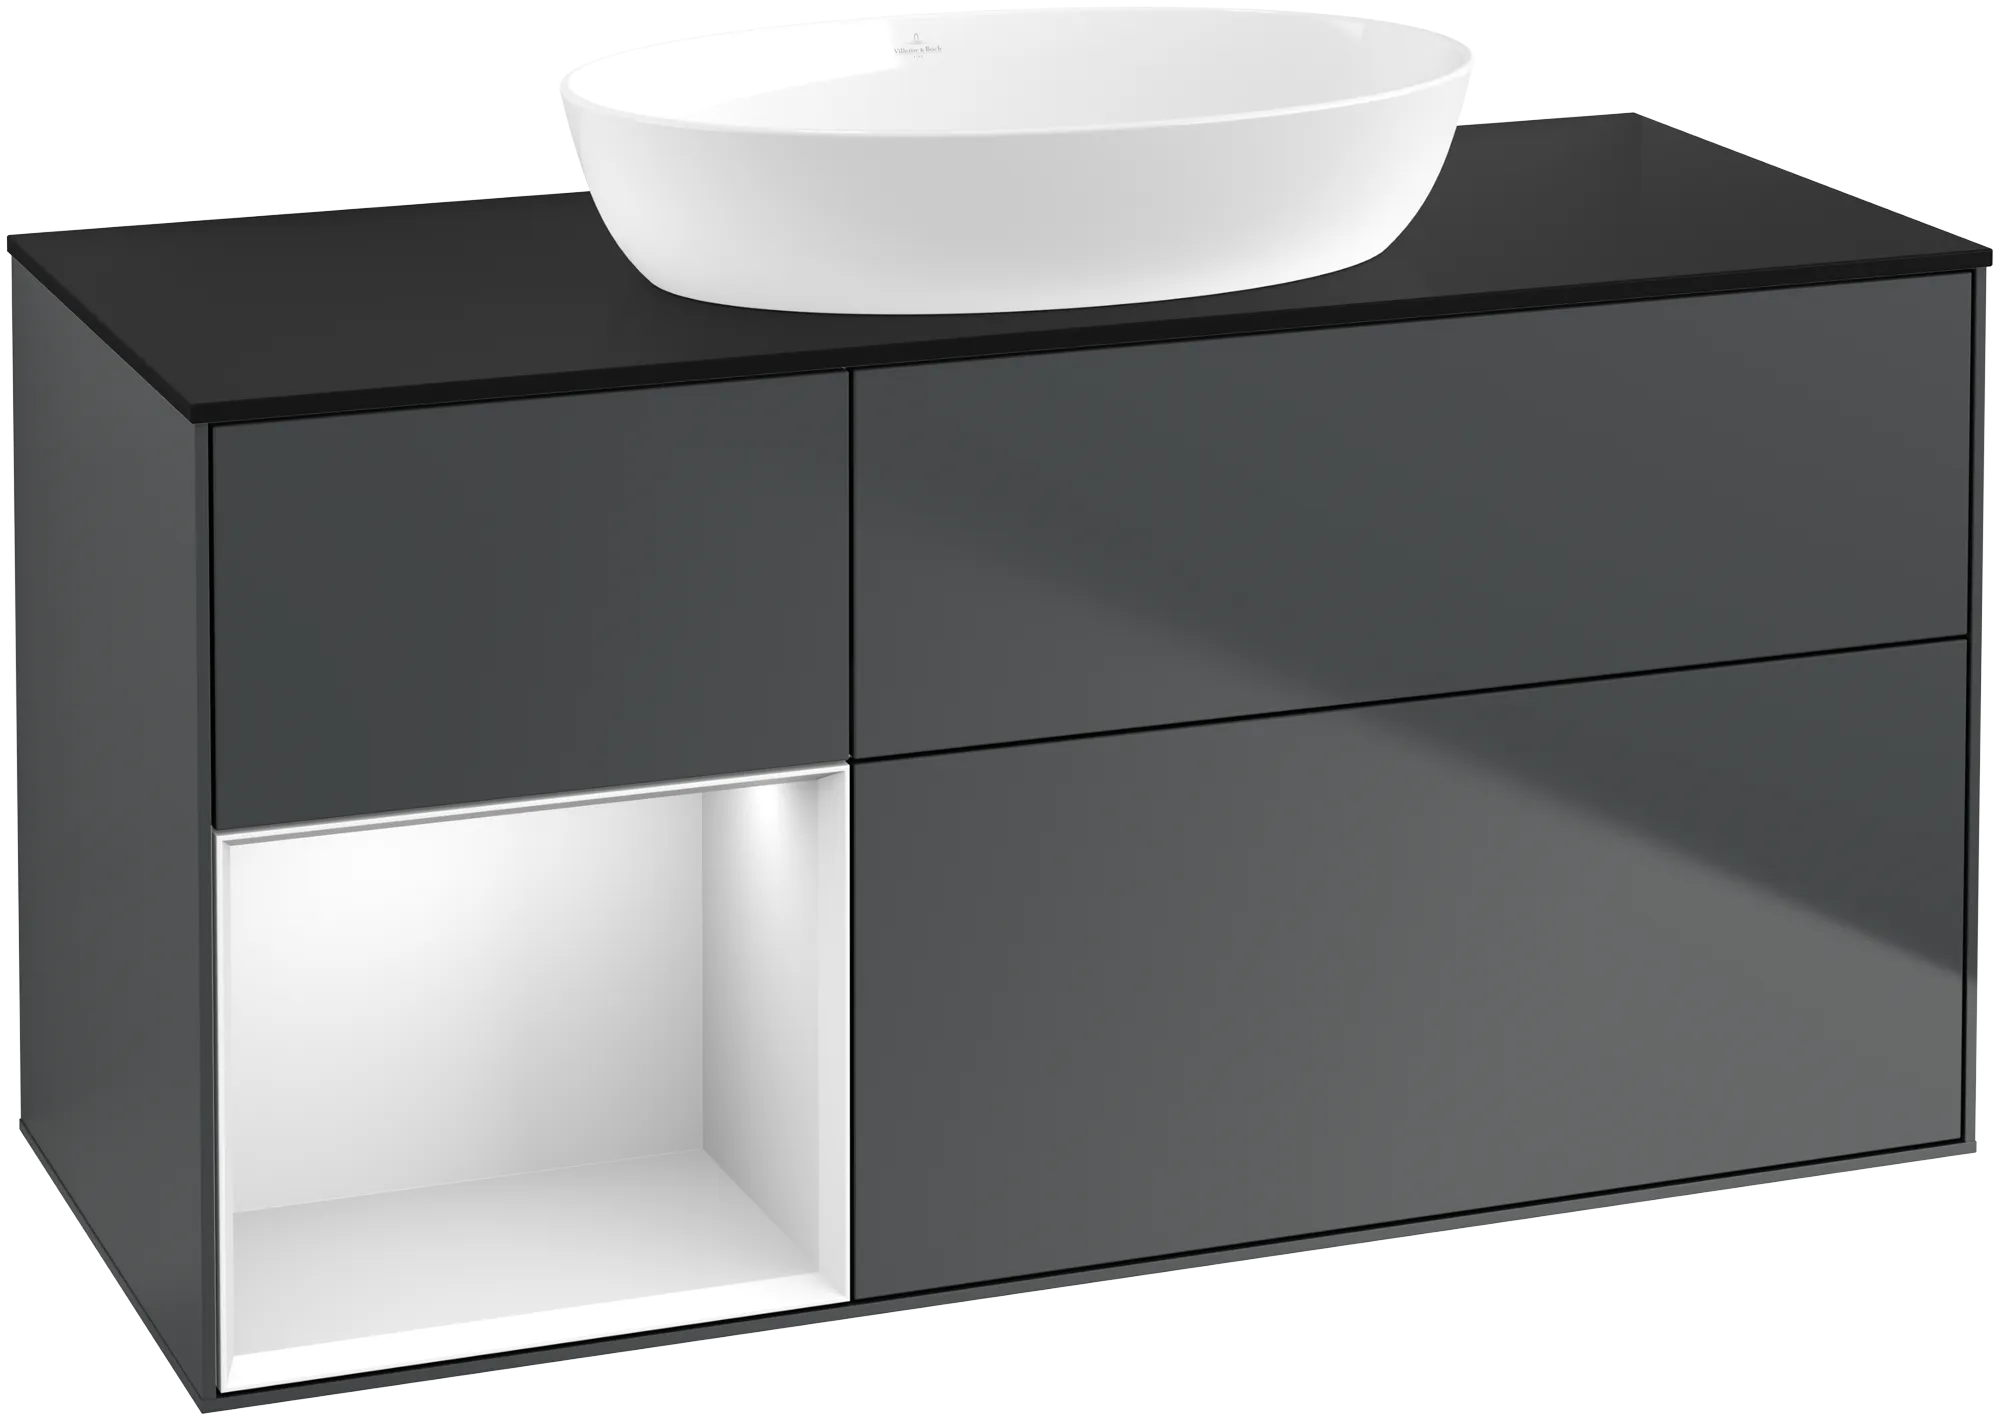 Picture of VILLEROY BOCH Finion Vanity unit, with lighting, 3 pull-out compartments, 1200 x 603 x 501 mm, Midnight Blue Matt Lacquer / White Matt Lacquer / Glass Black Matt #FA62MTHG